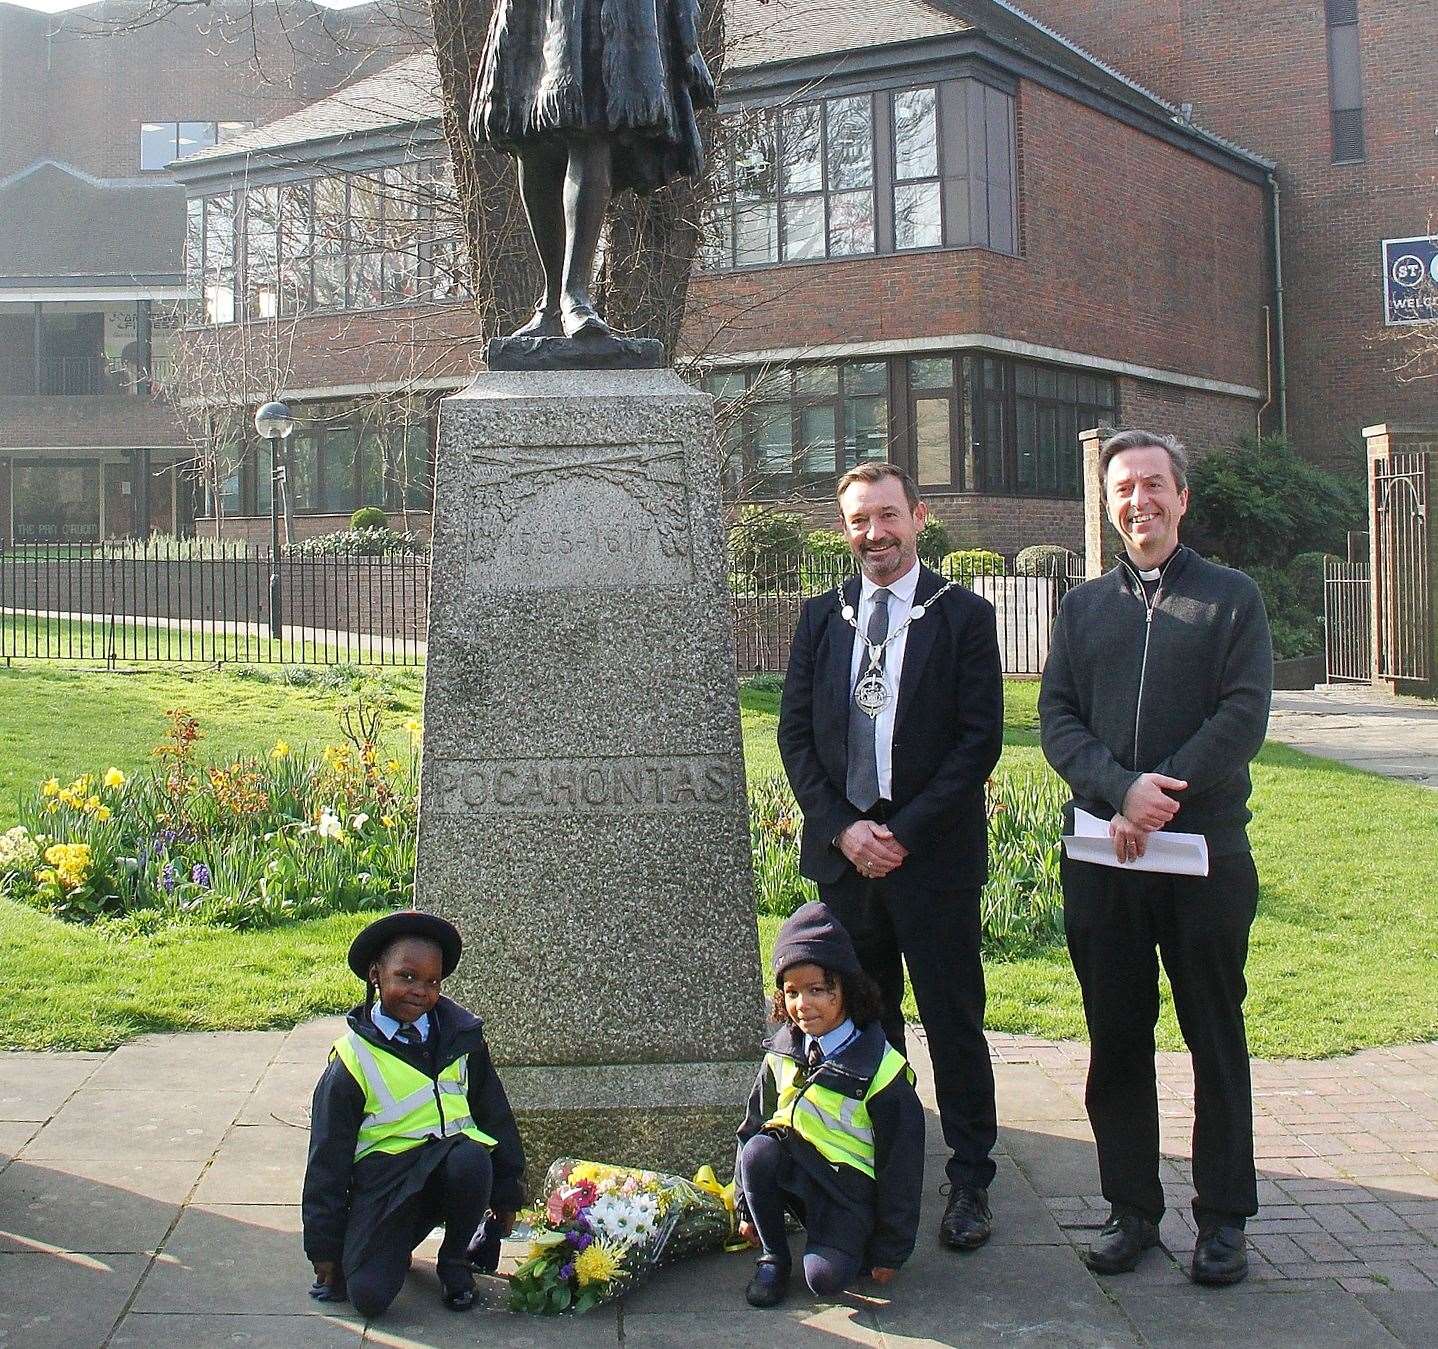 Flowers were laid at the foot of the statue. Picture: Gravesham Borough Council